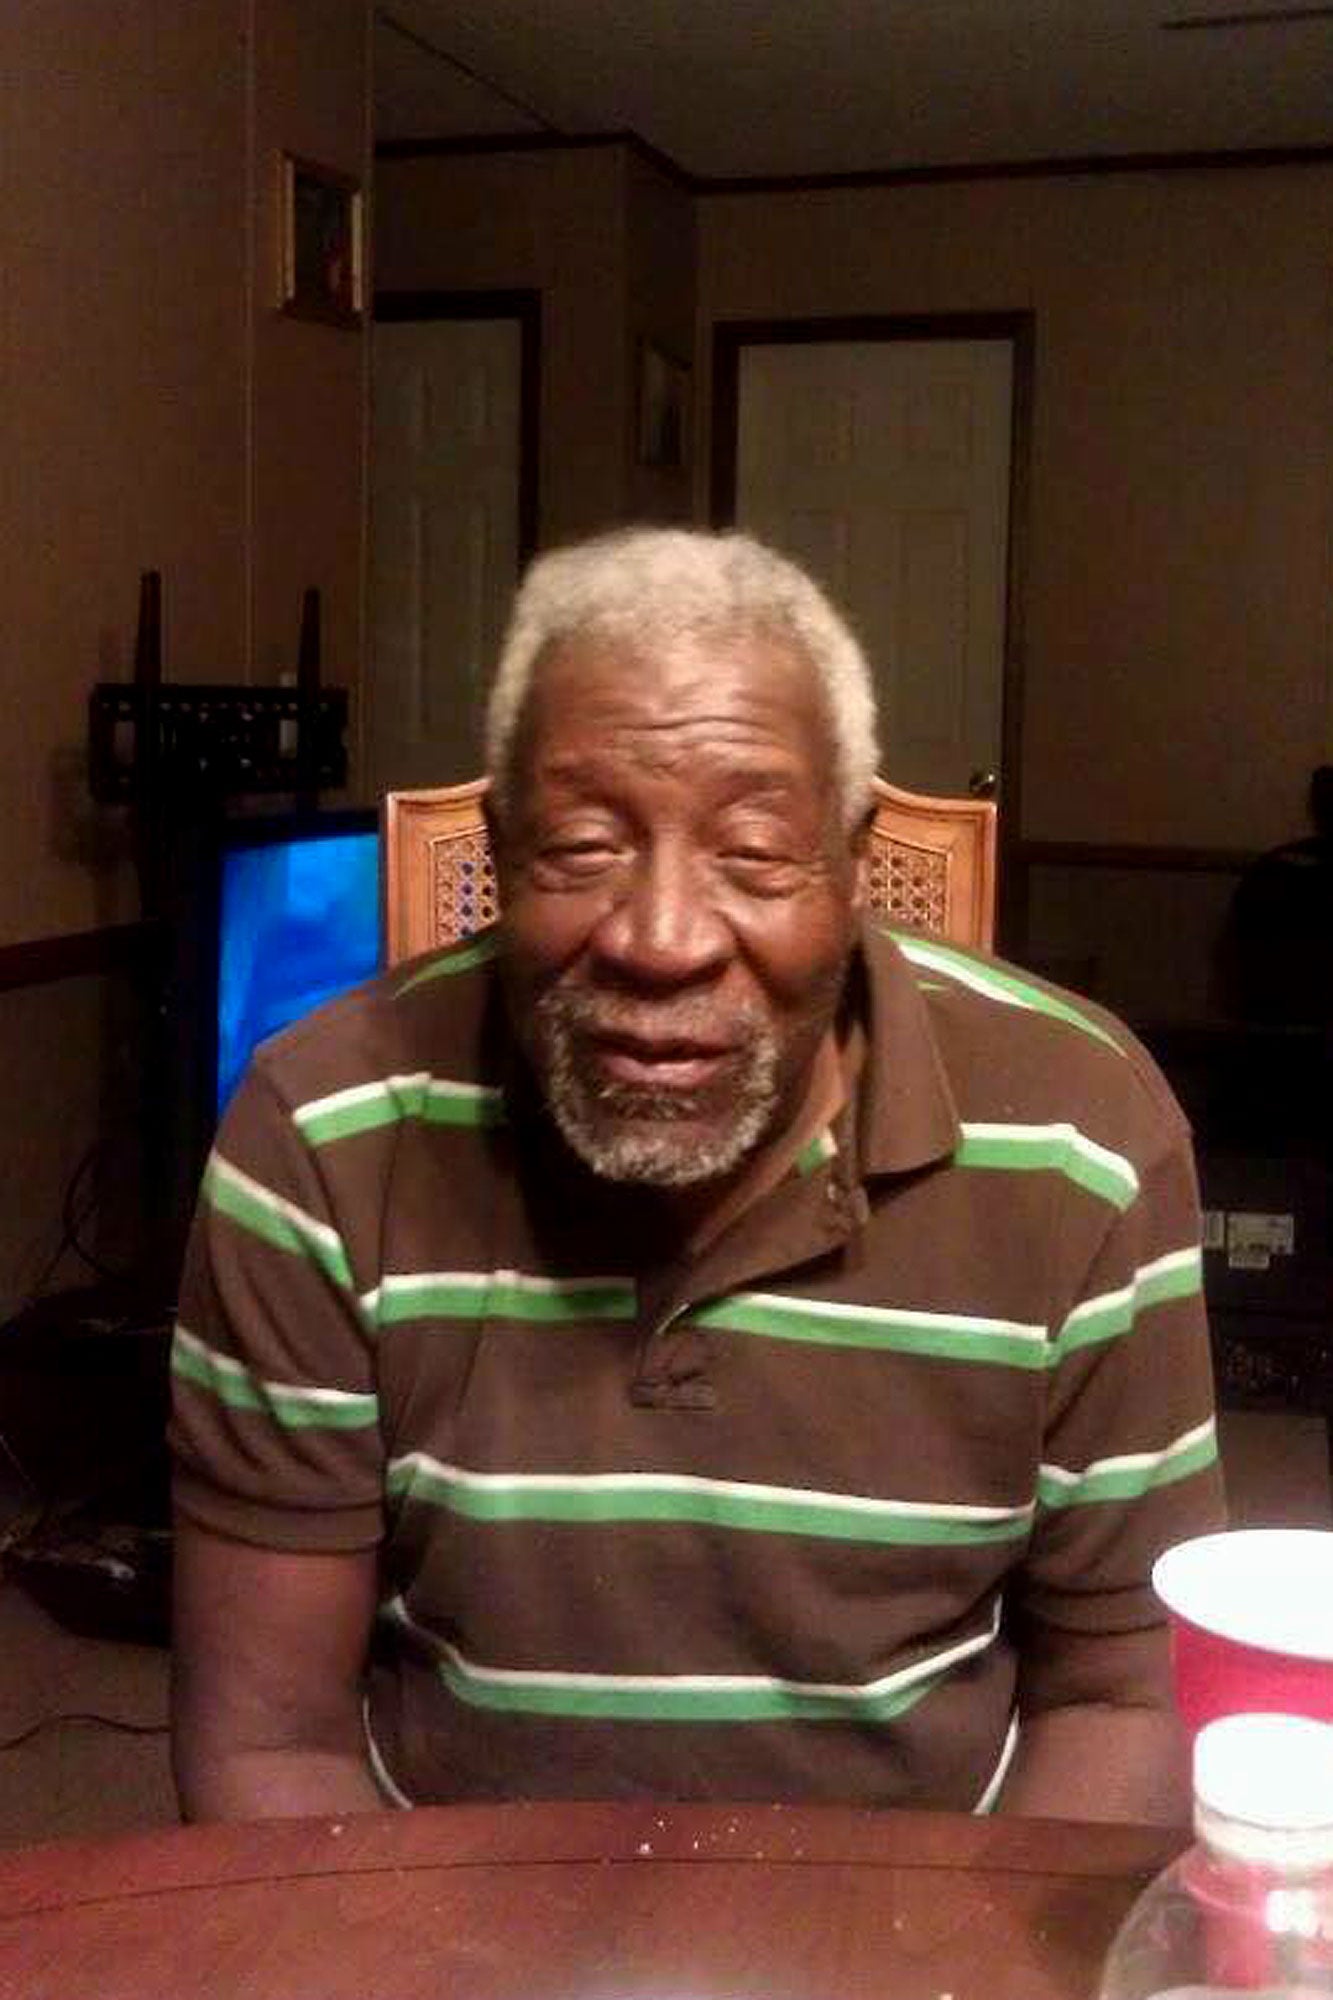 Robert Godwin, Grandfather Killed In Facebook Video, Honored By Family